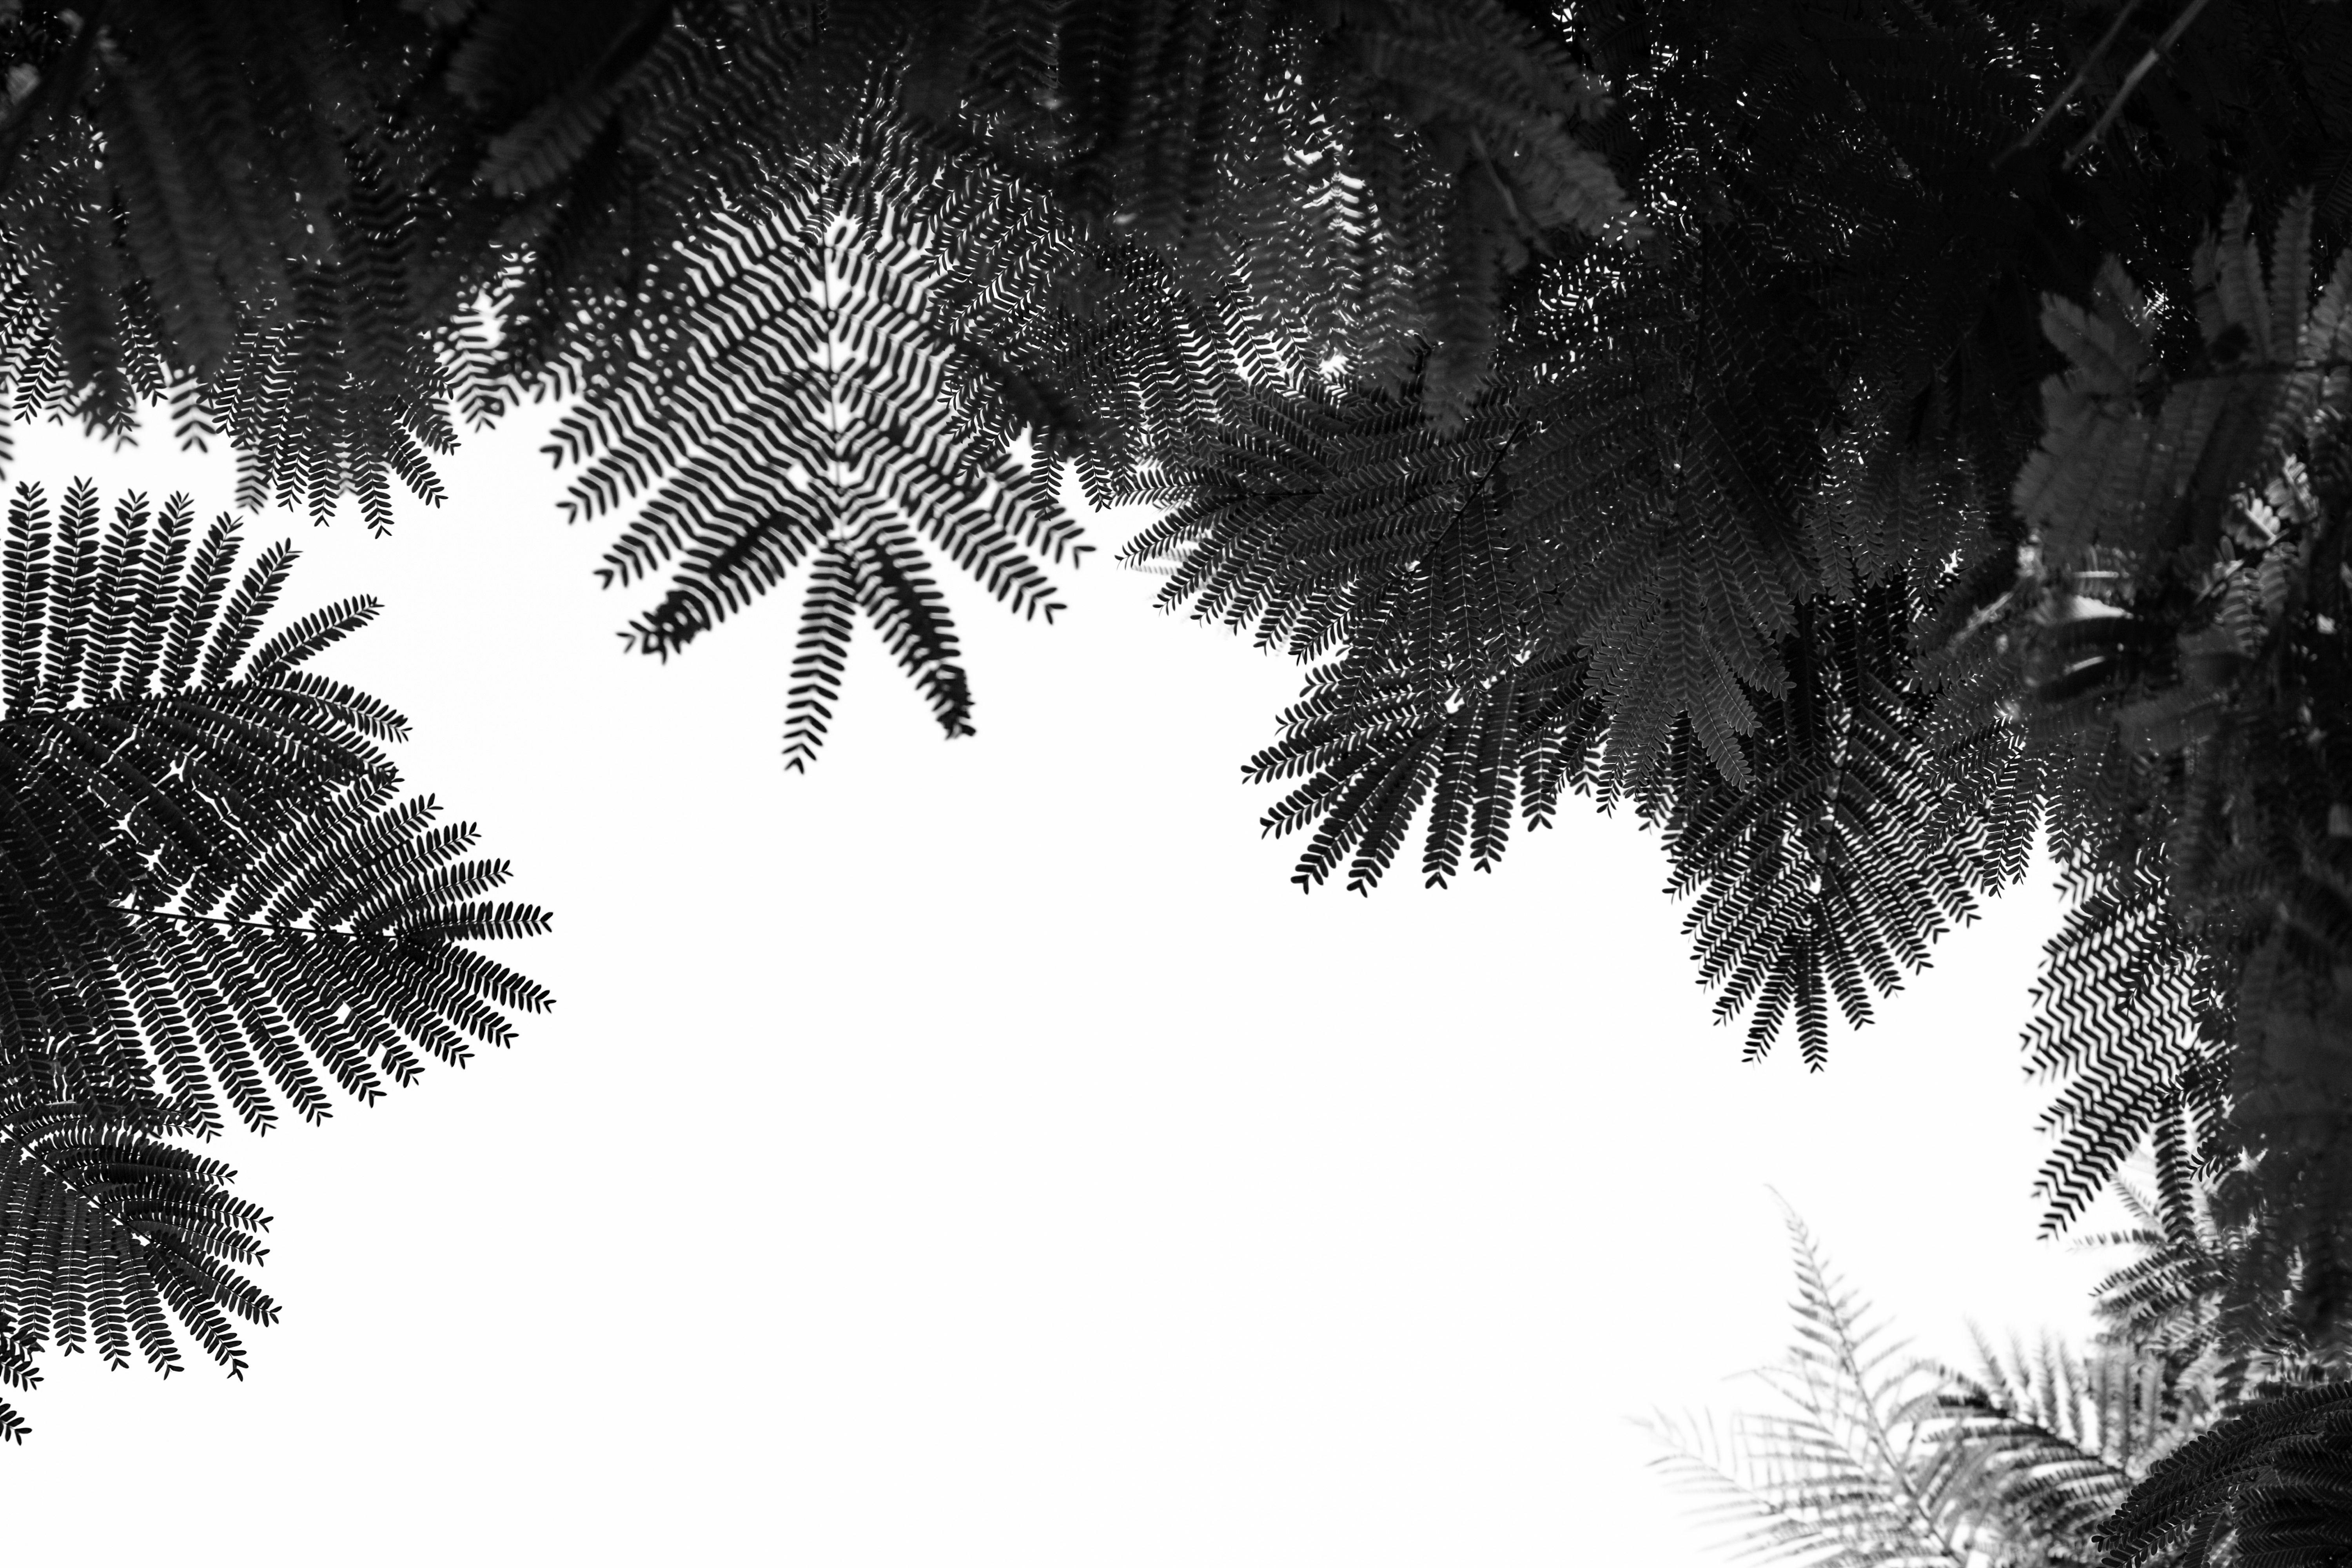 Tal Paz-Fridman Black and White Photograph - The Tree Top II, Photograph, Archival Ink Jet